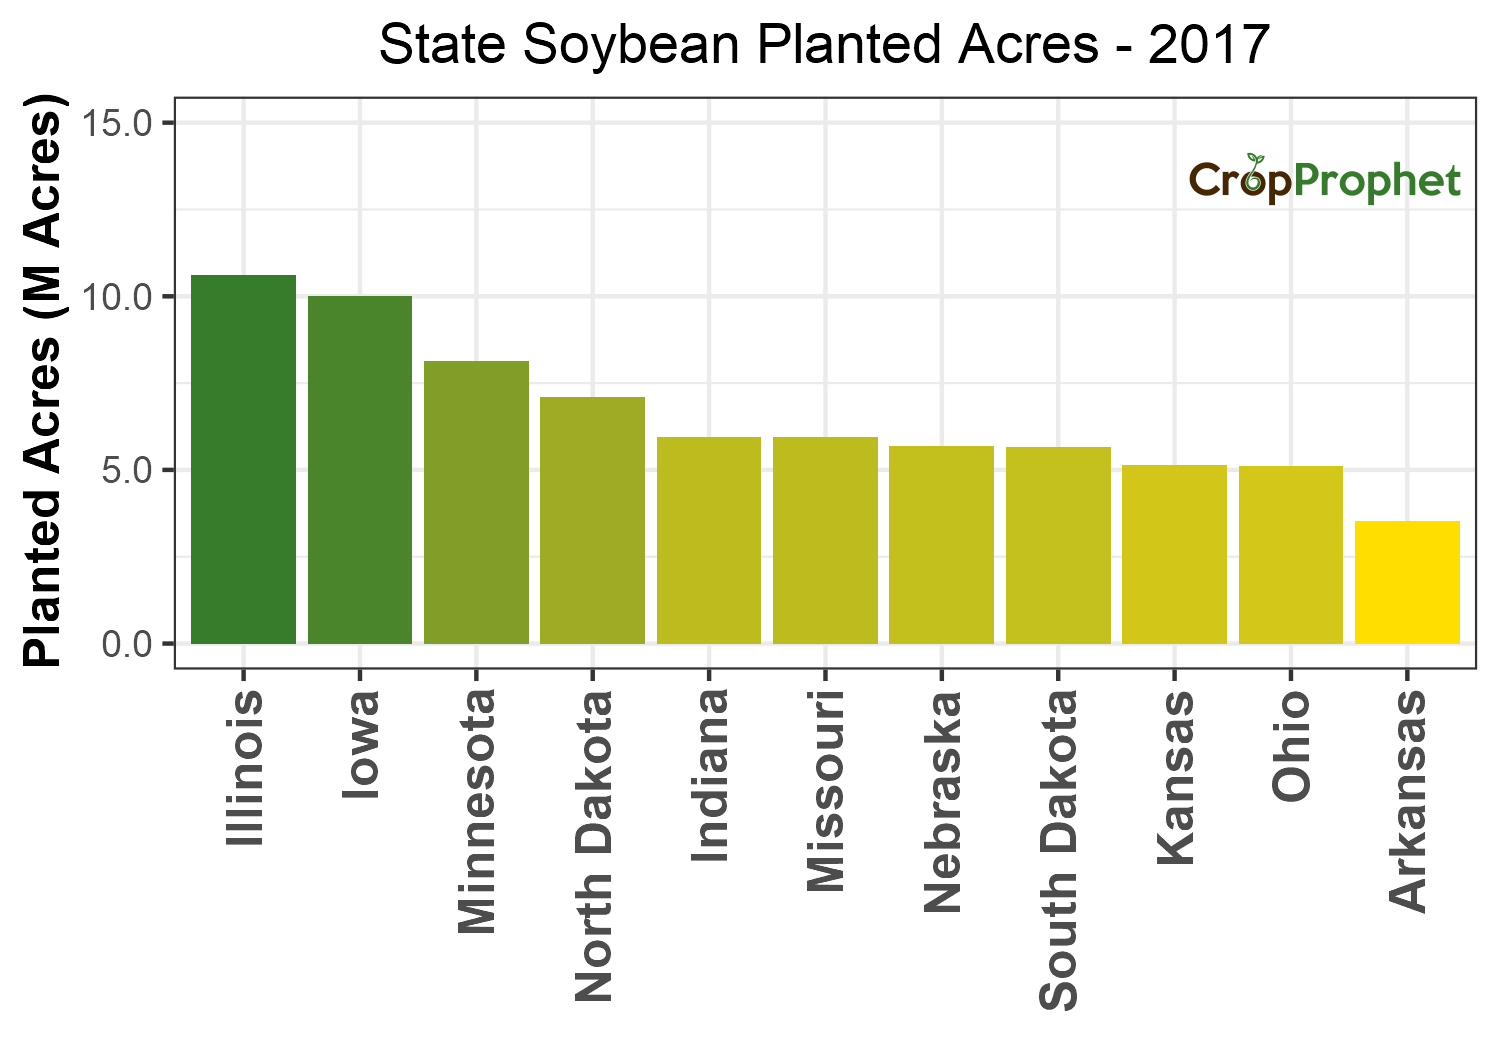 Soybean Production by State - 2017 Rankings